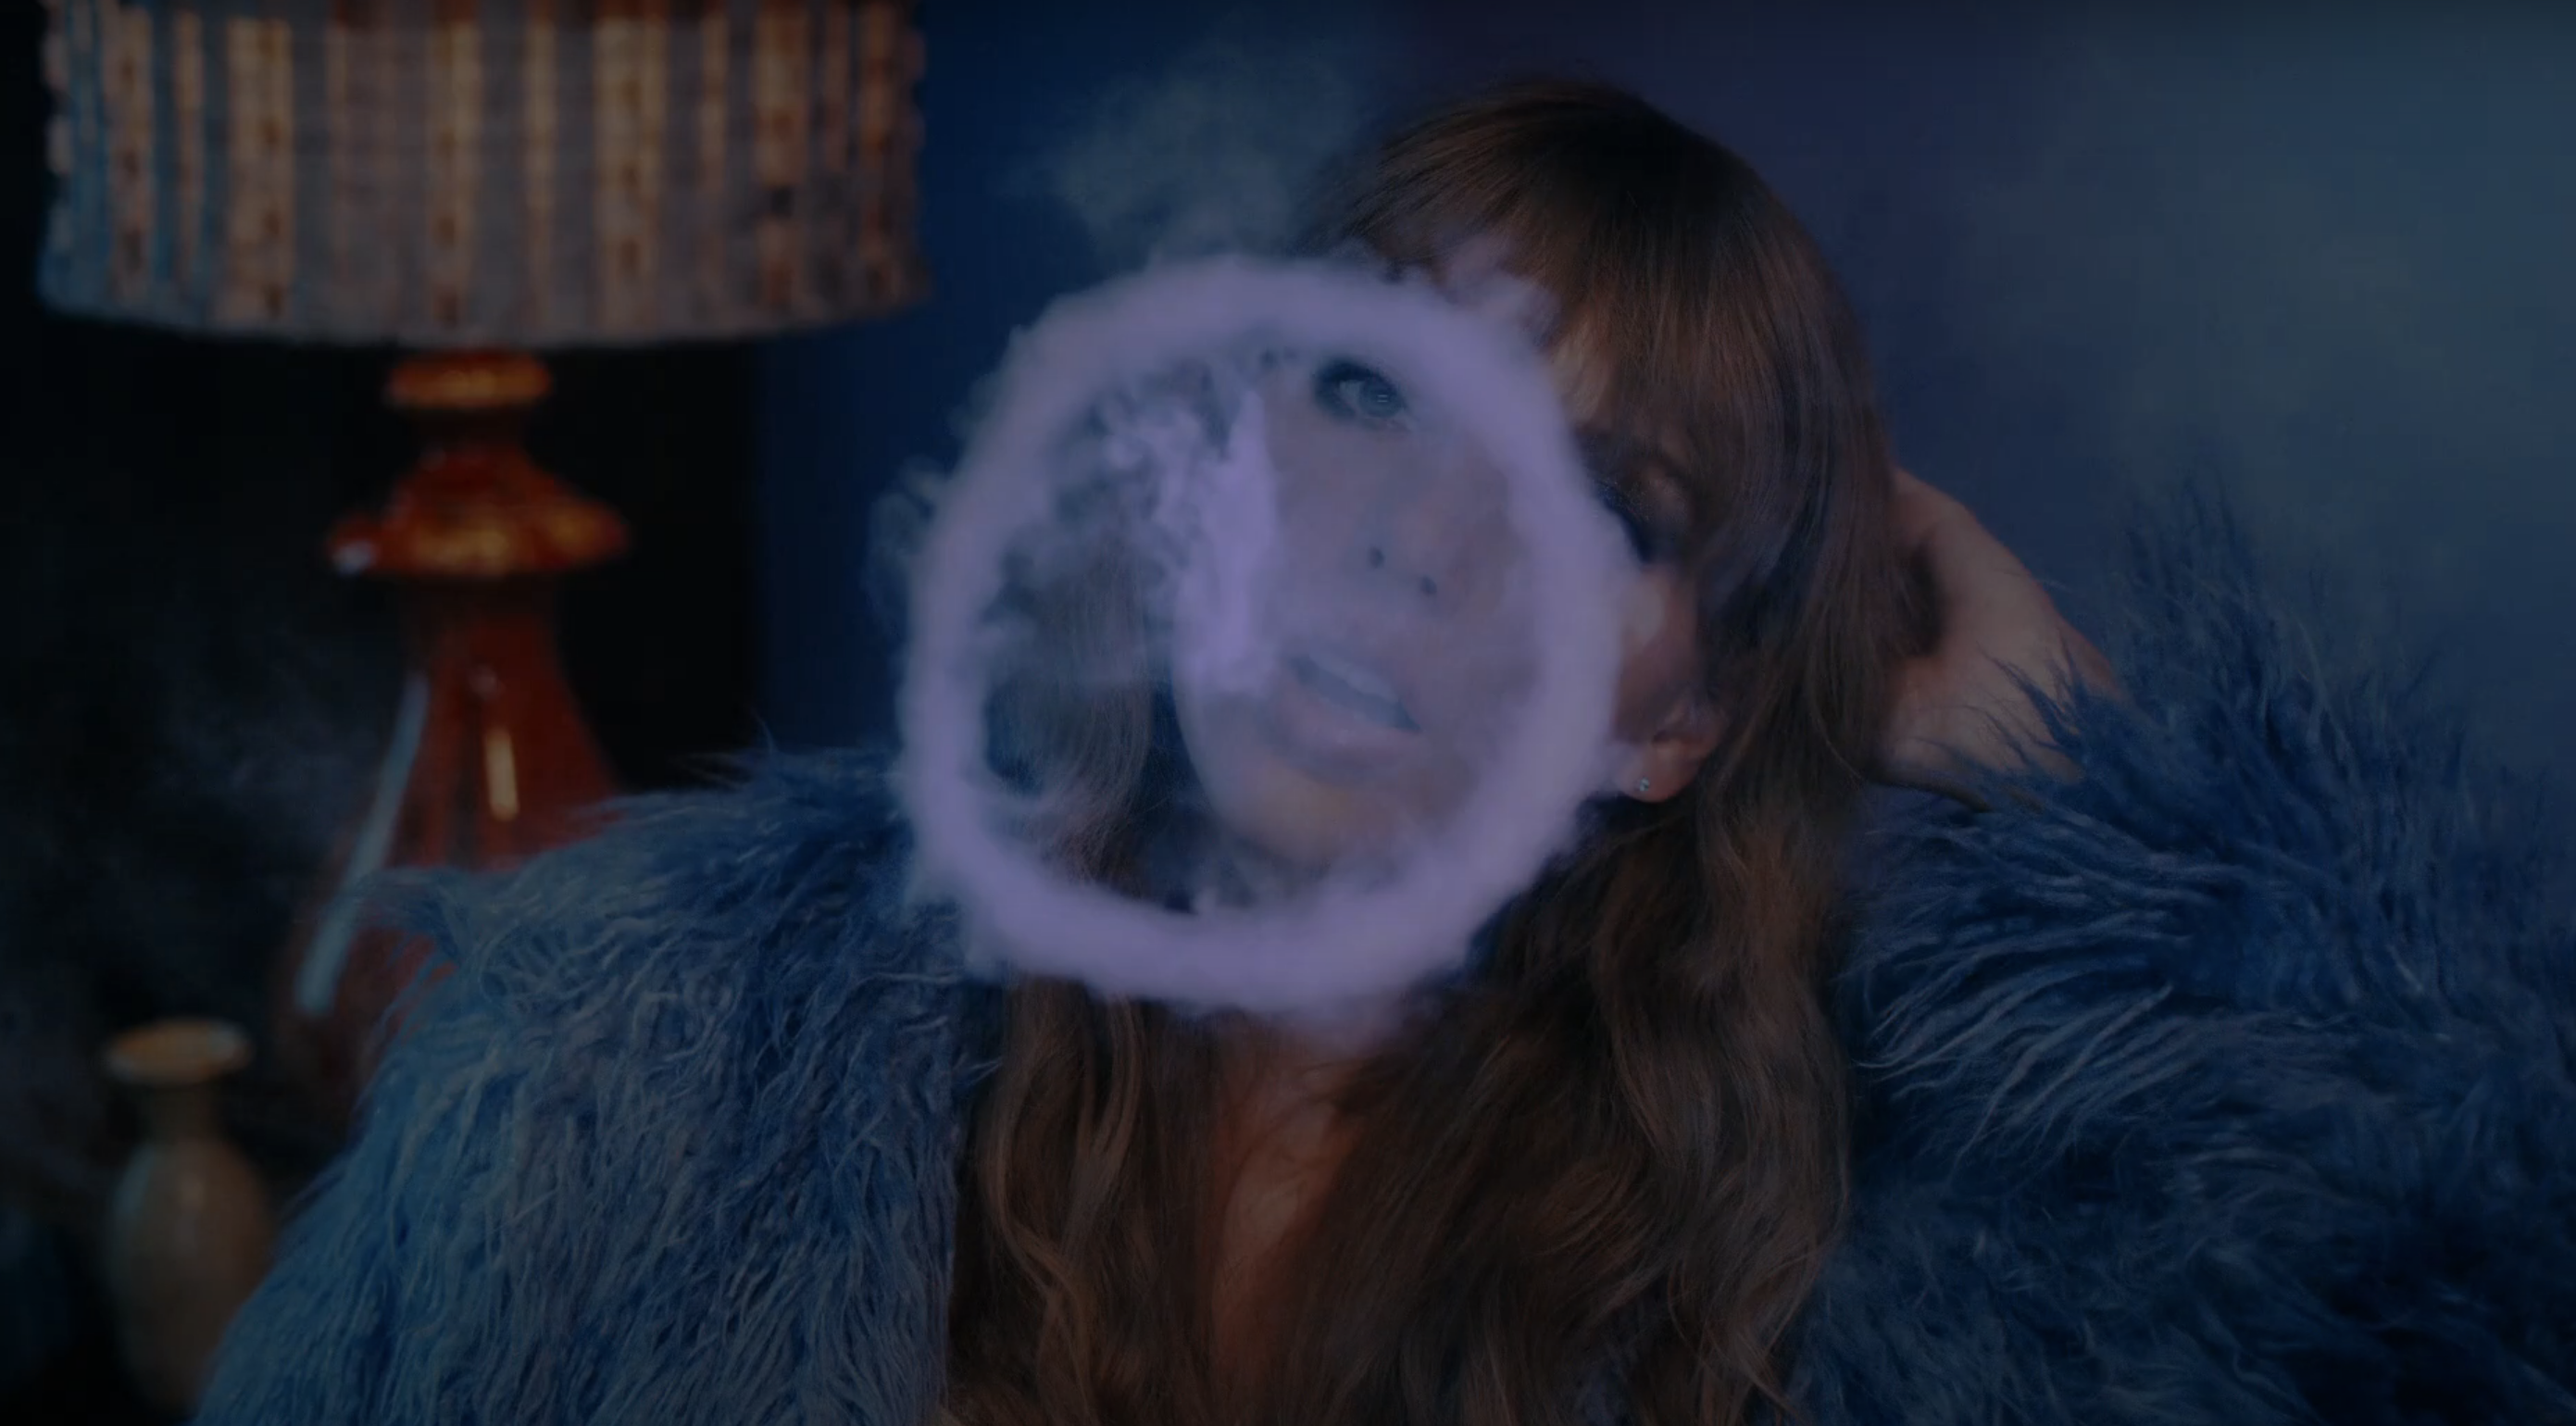 Taylor Swift Releases Music Video For Lavender Haze